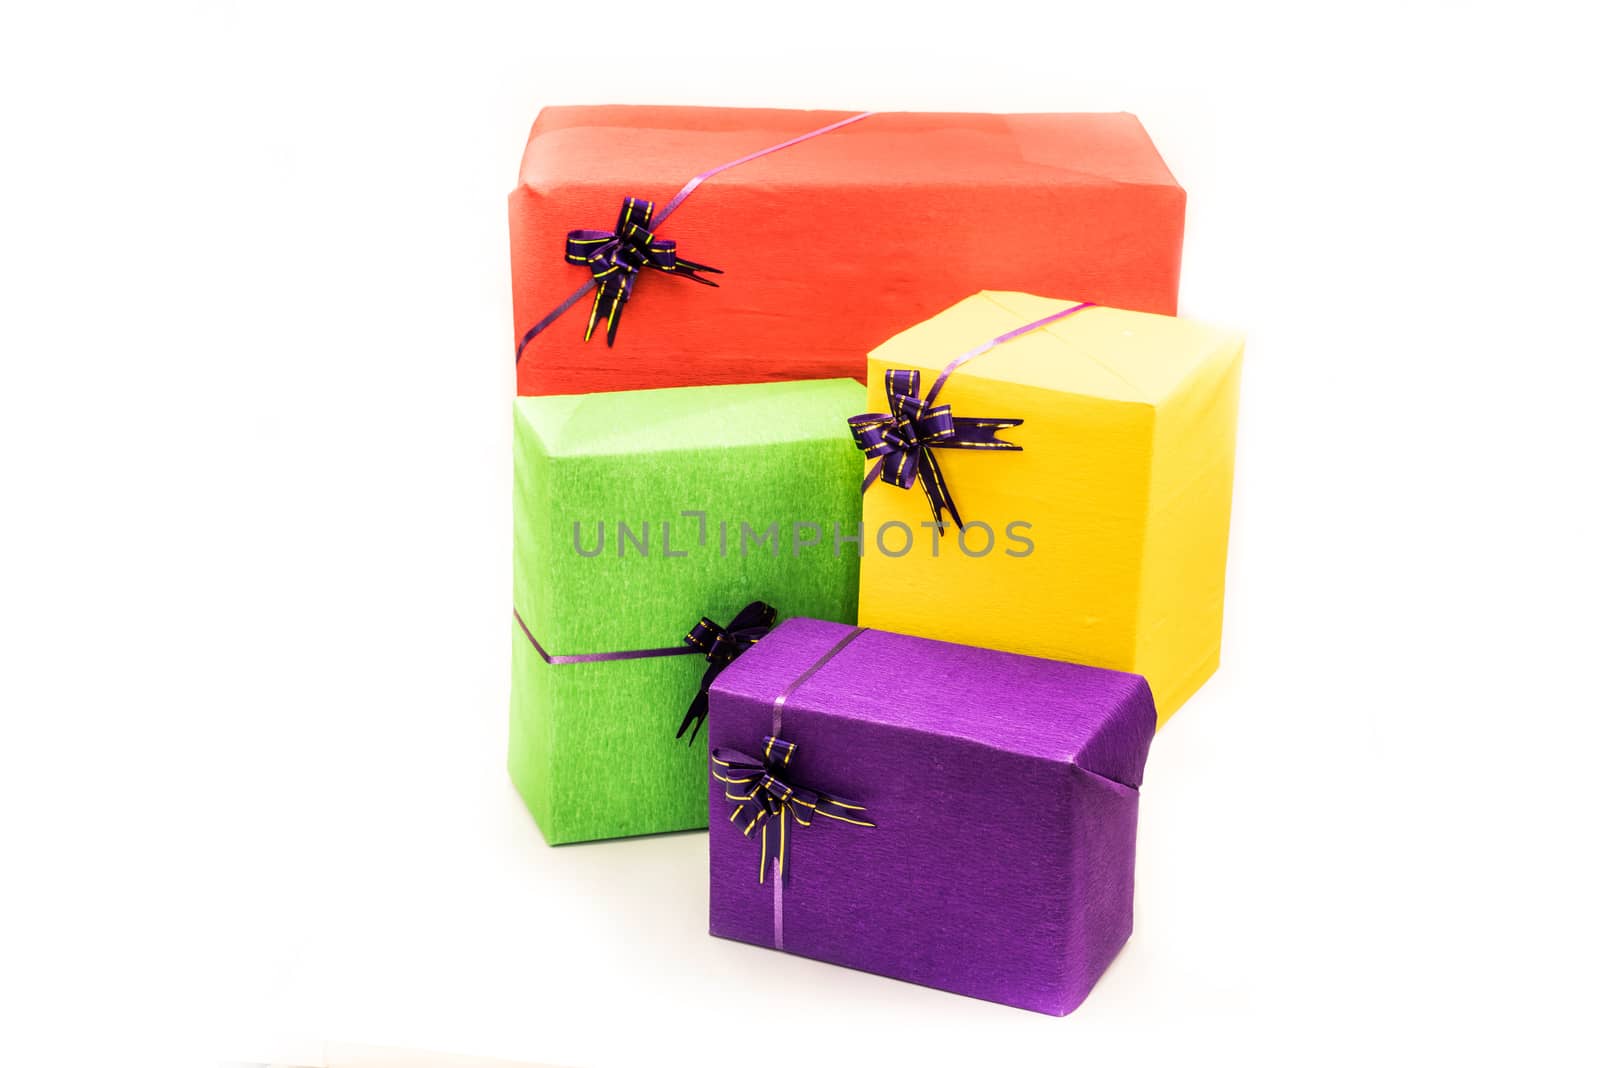 holiday present colored gift boxes, packaging pile. Christmas, new year birthday gift concept by Desperada